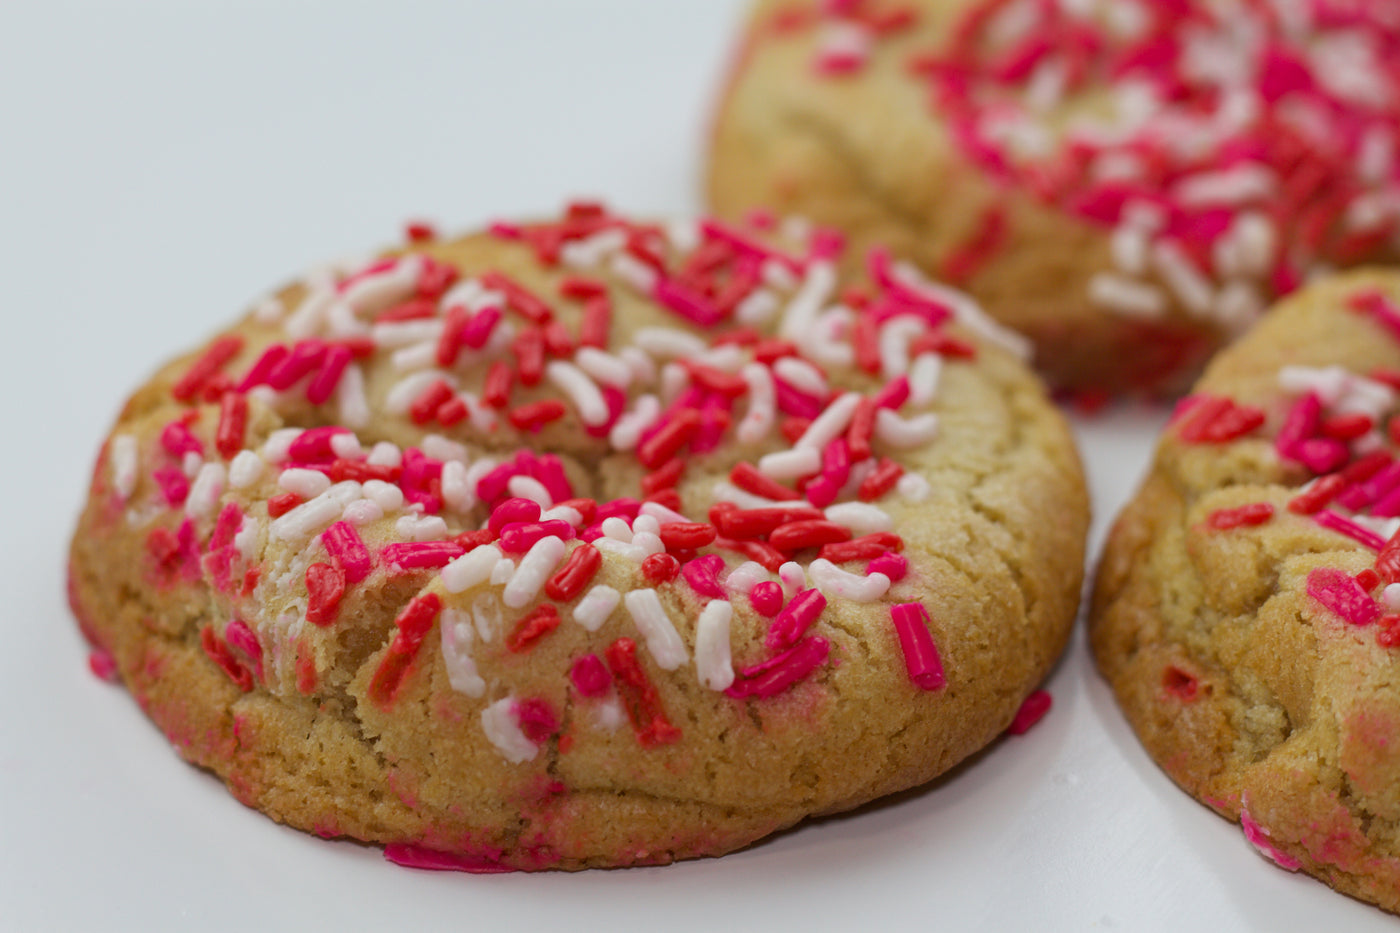 No Chip with Sprinkles cookies 